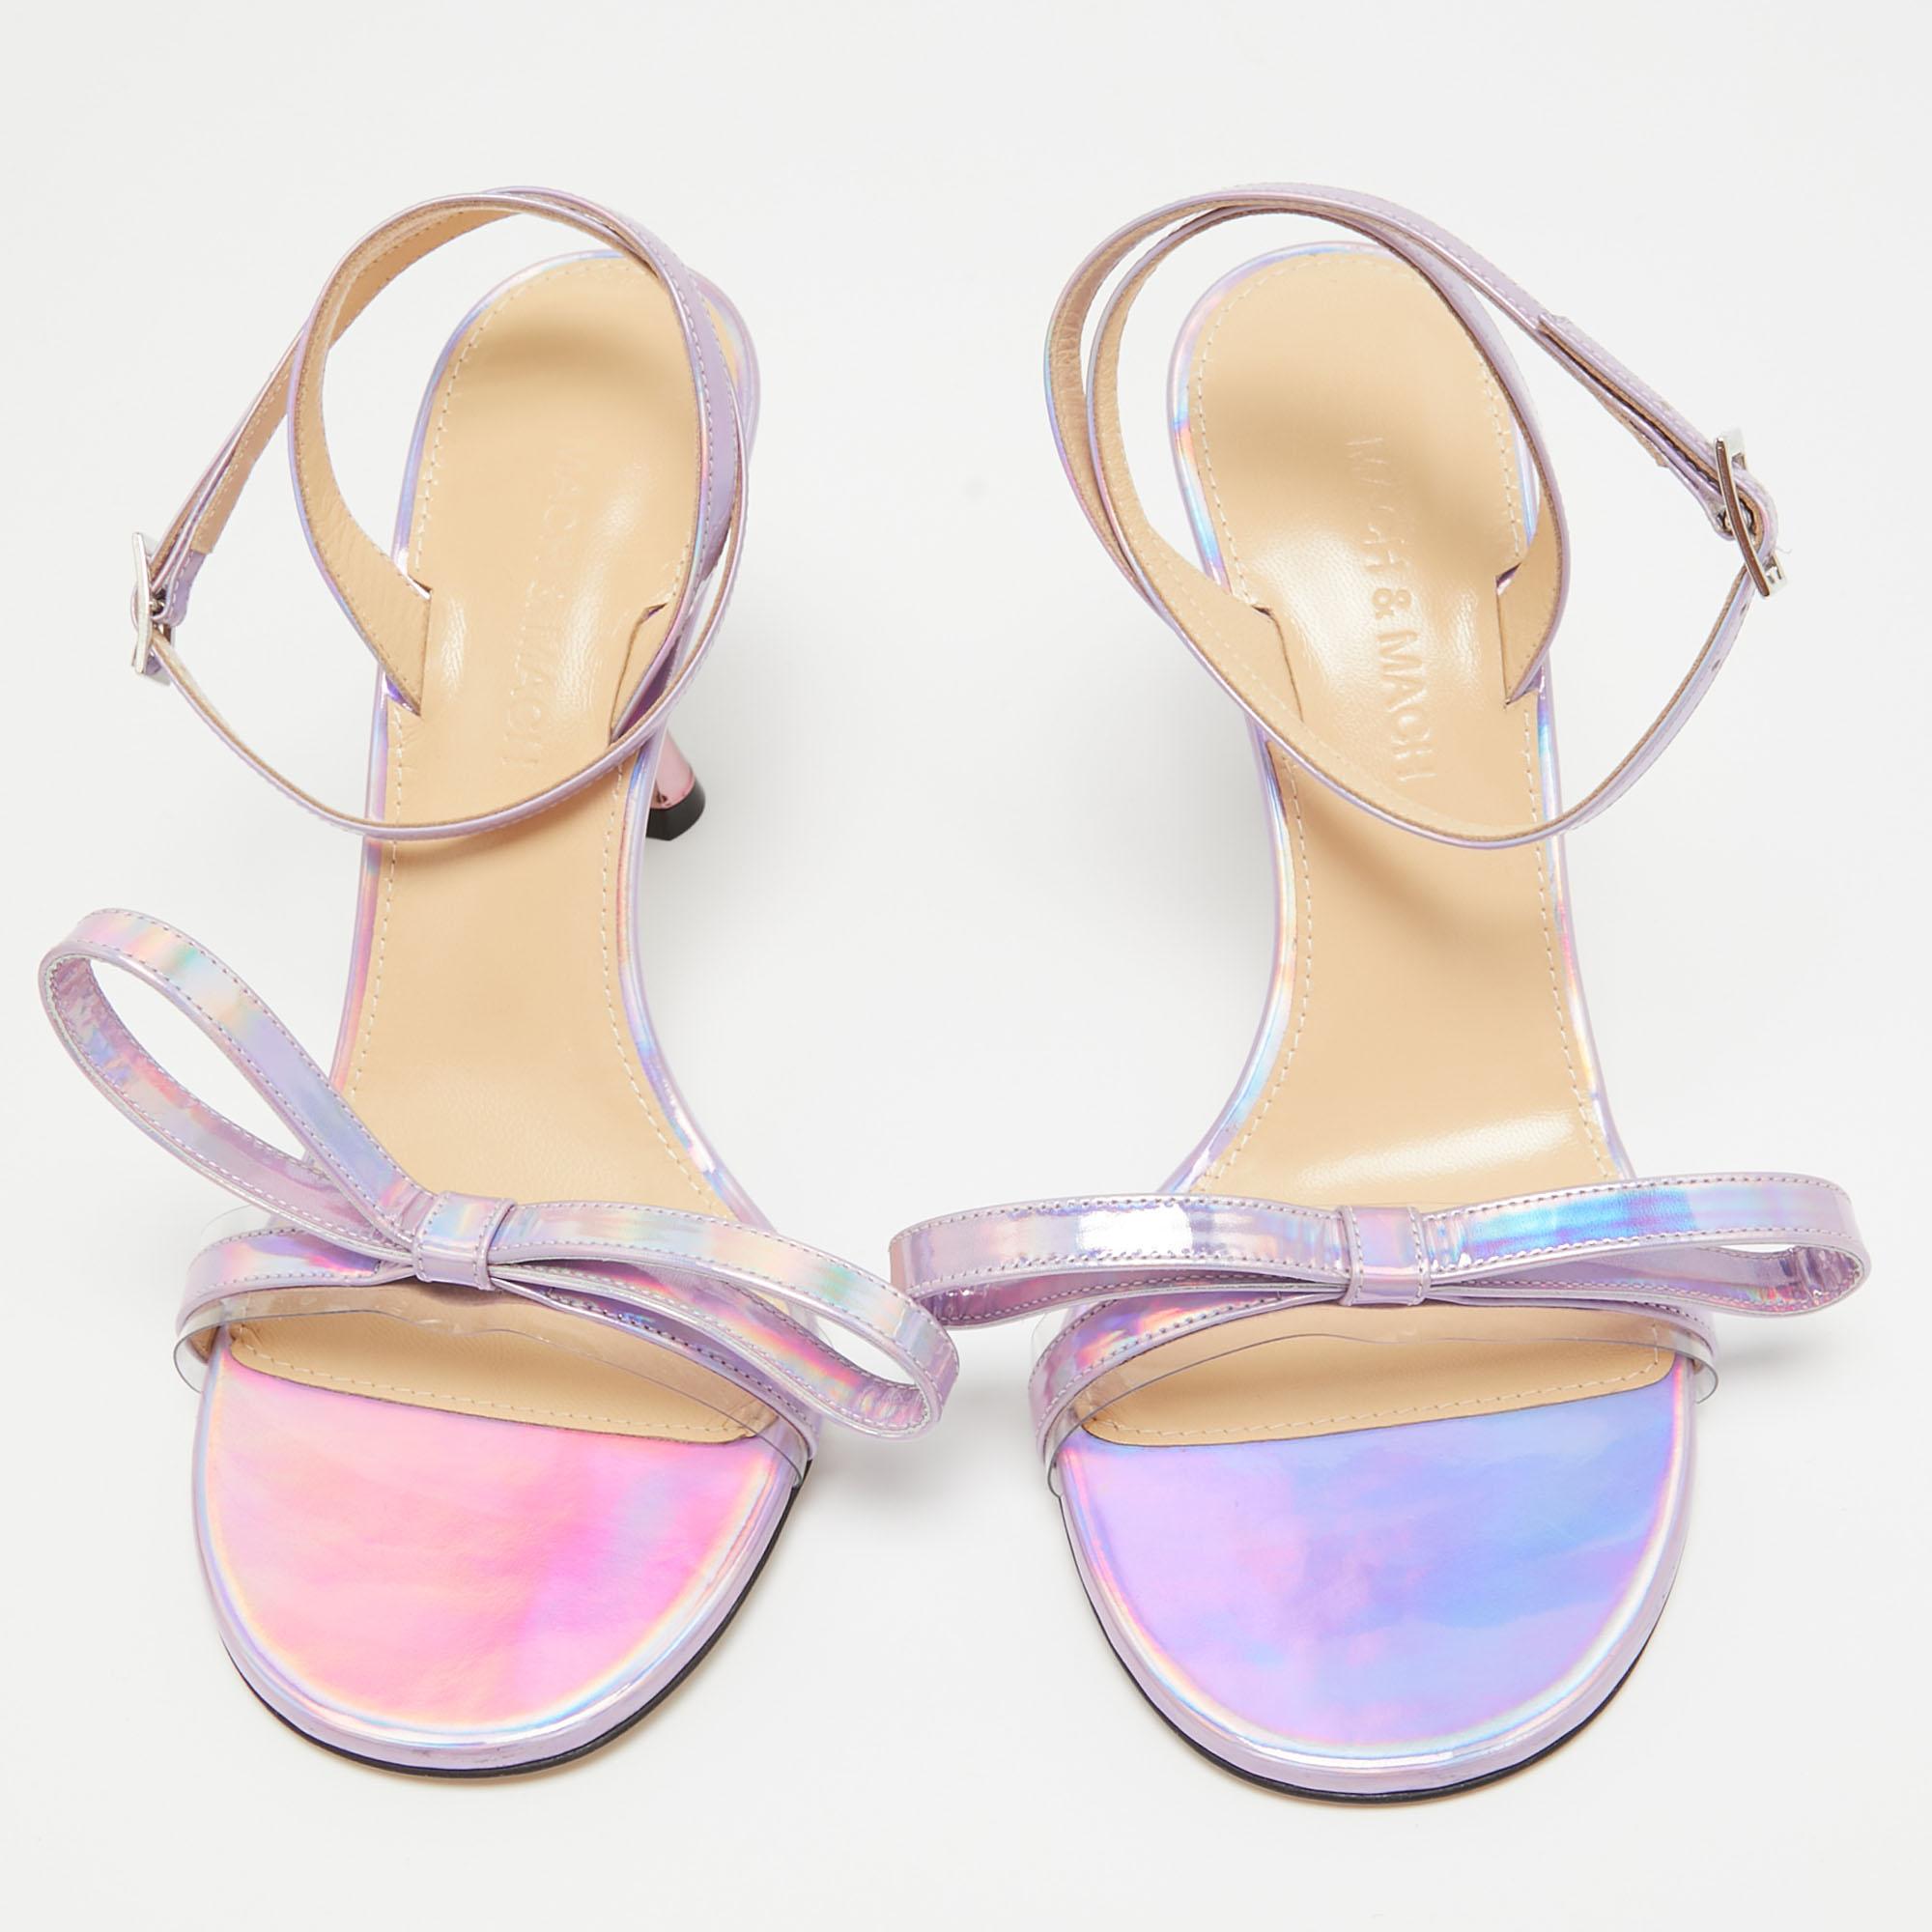 Slip into the epitome of playful luxury with Mach & Mach's sandals. Crafted with meticulous attention to detail, these sandals feature a charming French bow accent, they are crafted using iridescent leather for a captivating, statement-making